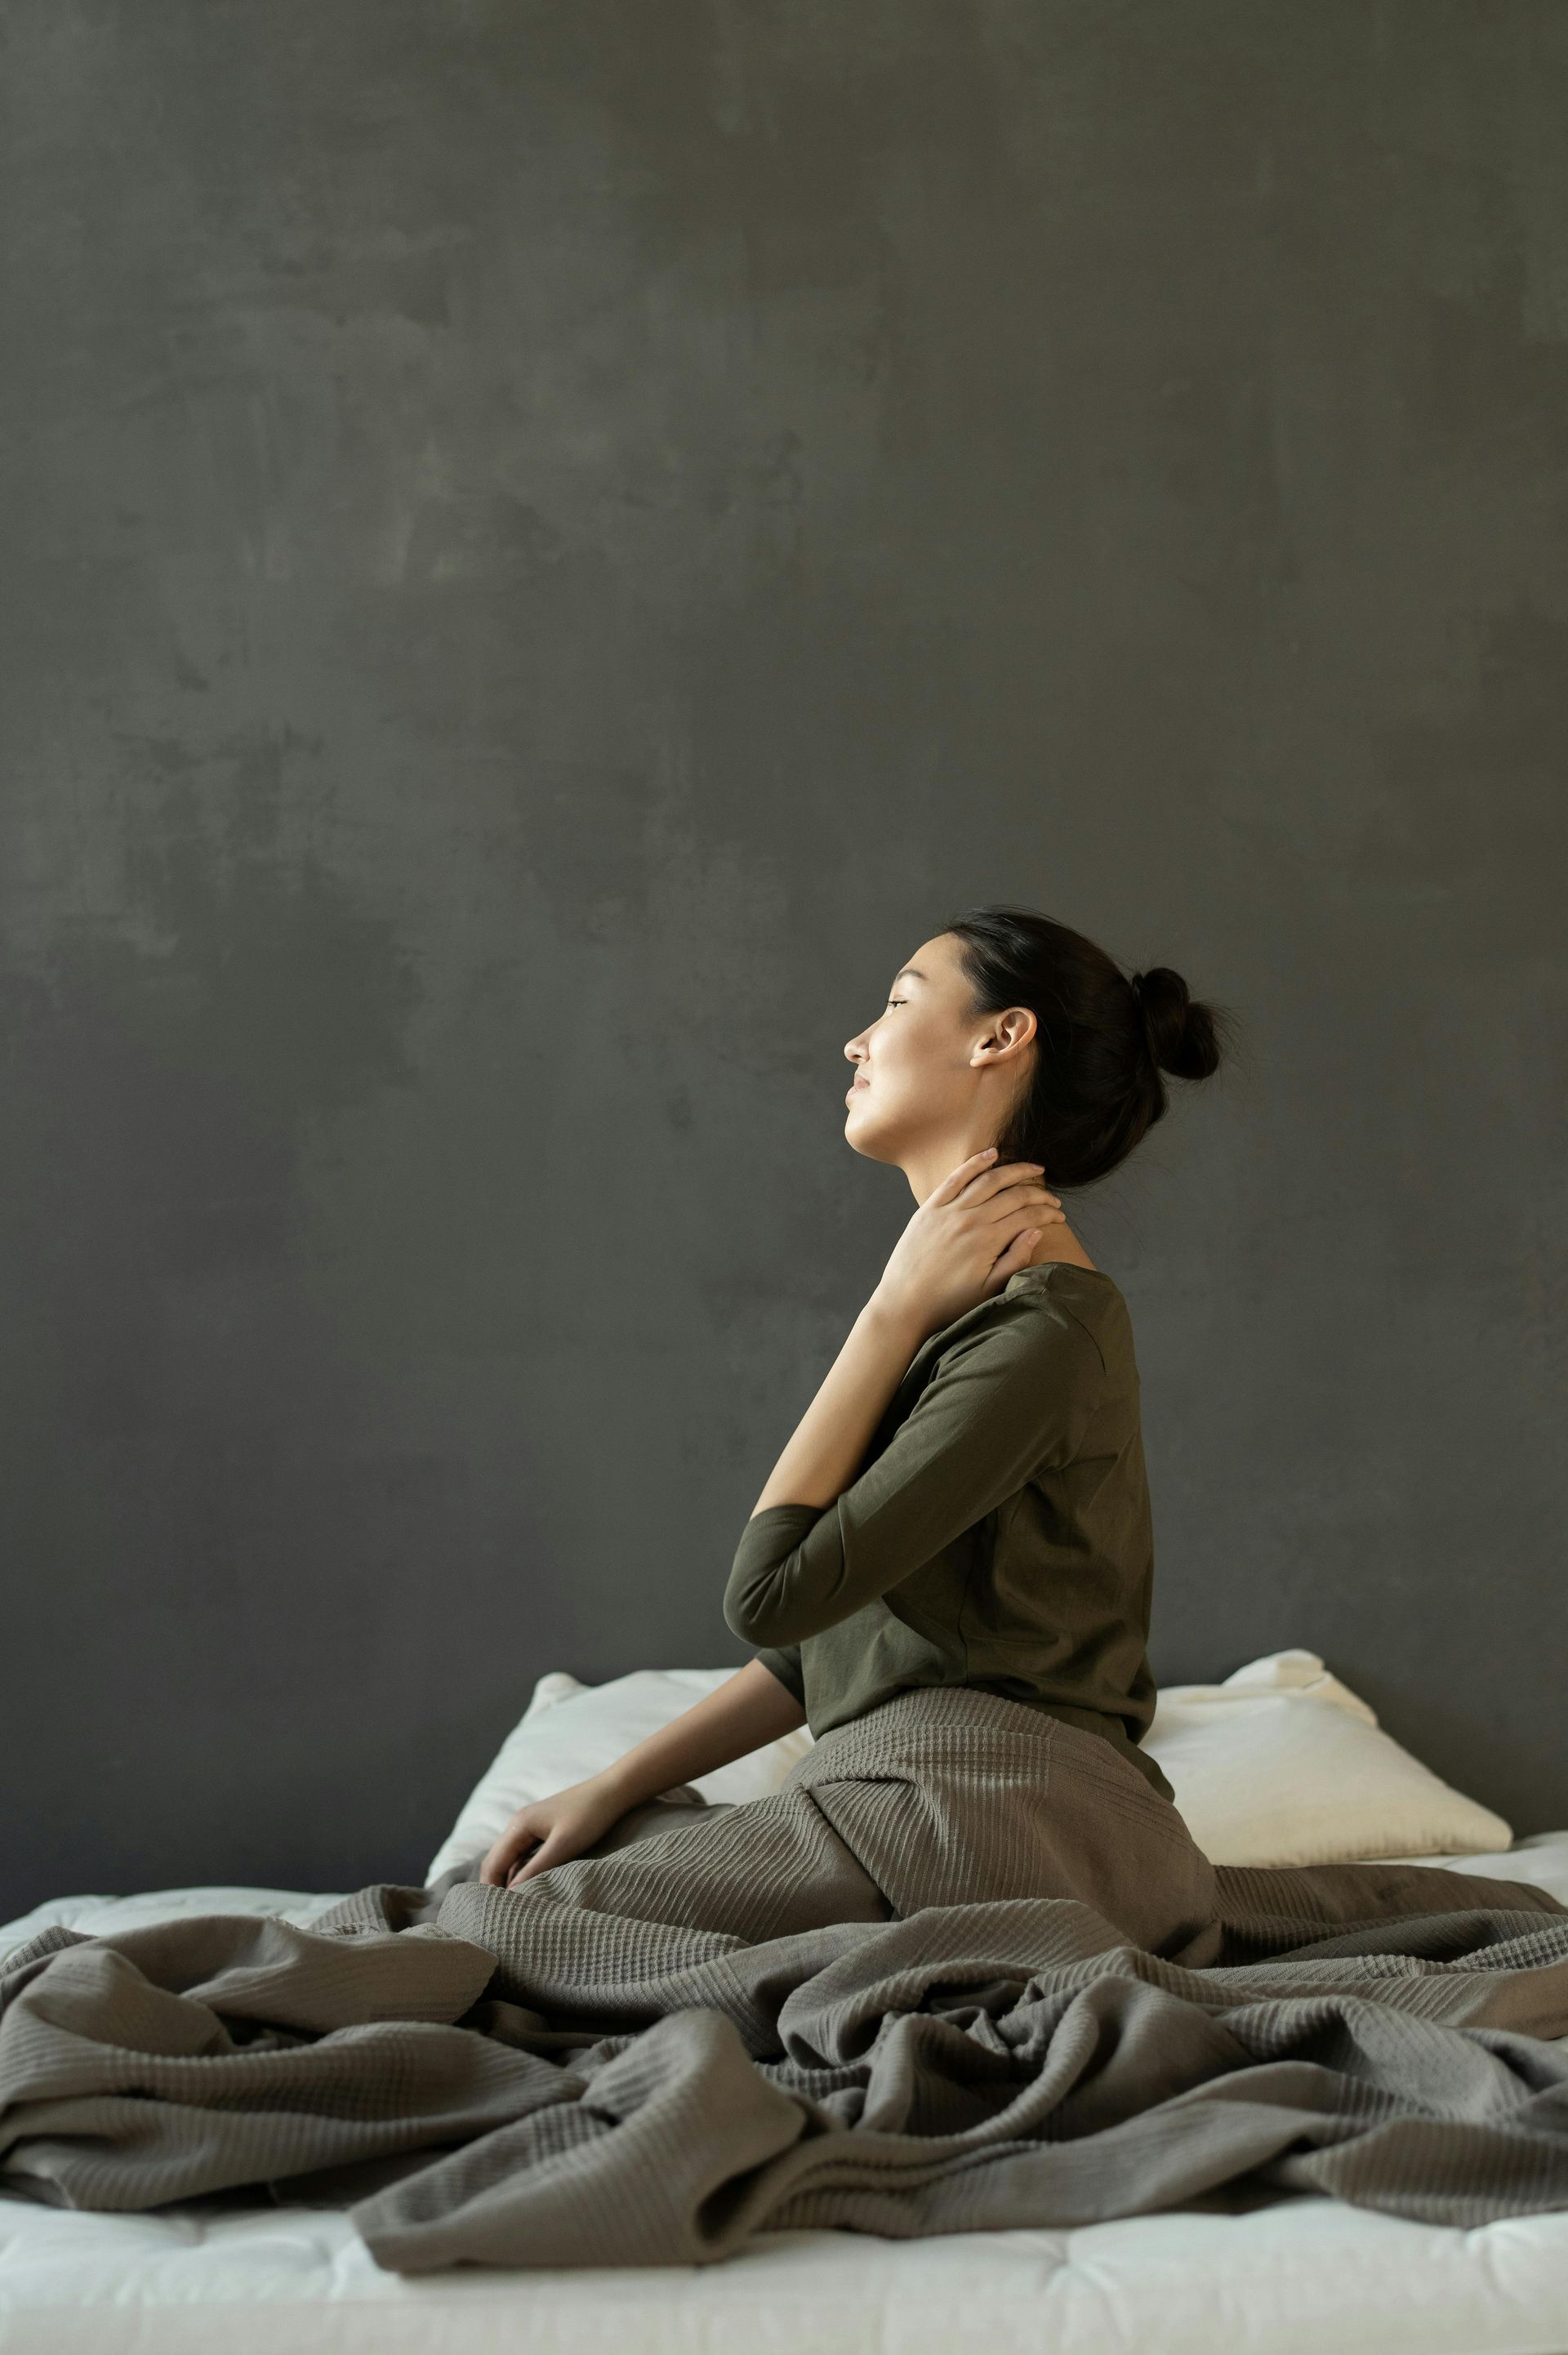 pain relief, pain, mindfulness practices, woman in bed in pain, neck pain